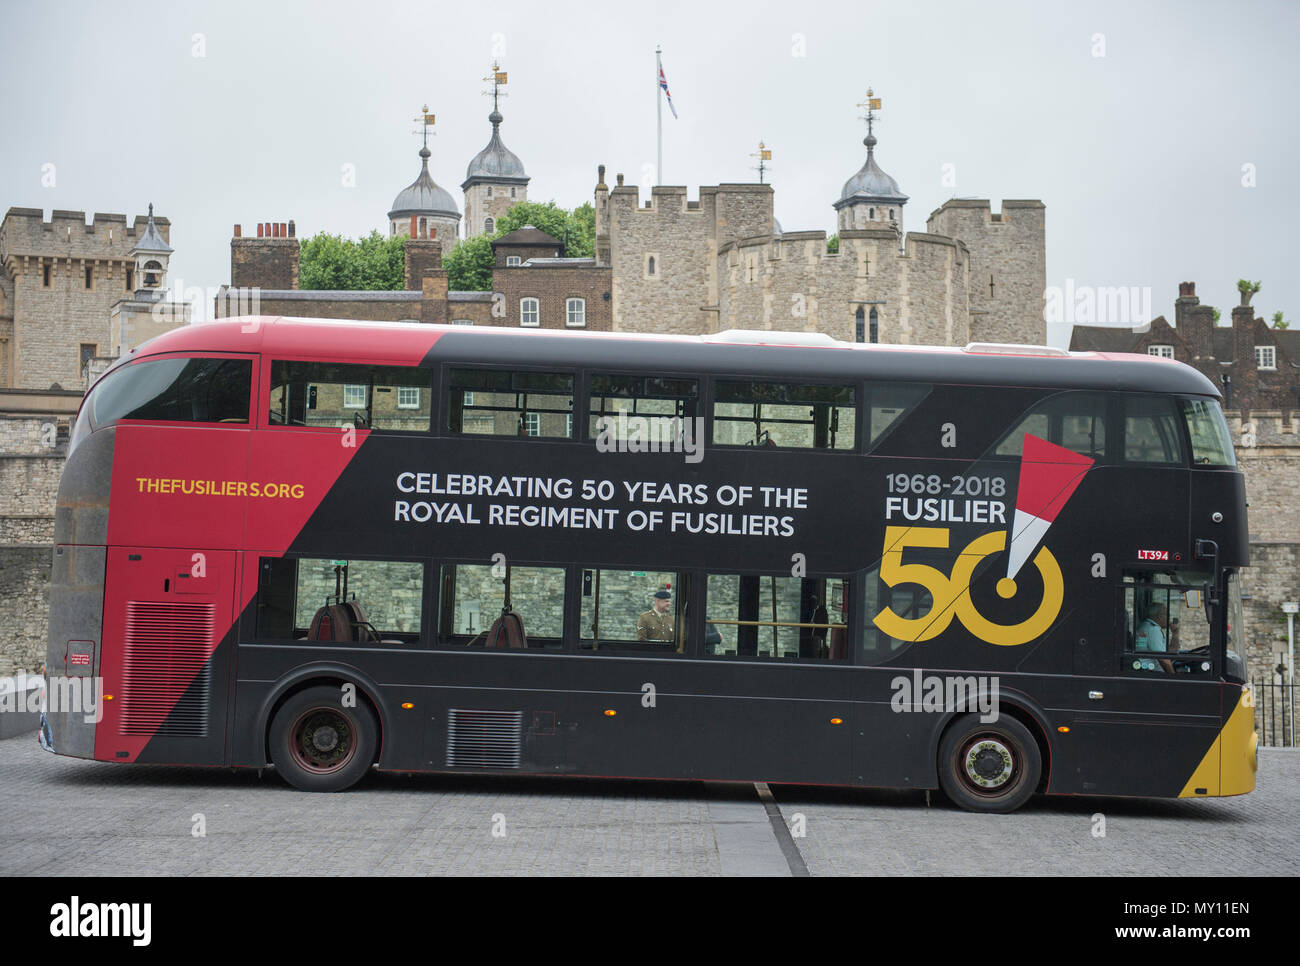 Tower of London, UK. 5 June, 2018. To mark the special occasion of the Royal Regiment of Fusiliers 50th anniversary a new double decker Routemaster bus has been wrapped in the Regimental colours of rose and primrose on a striking black background and features the Fusilier 50 logo. The initiative is a joint partnership between the Royal Regiment of Fusiliers, Go-Ahead London, Exterion Media and Historic Royal Palaces, an independent charity who look after The Tower of London. Credit: Malcolm Park editorial/Alamy Live News Stock Photo